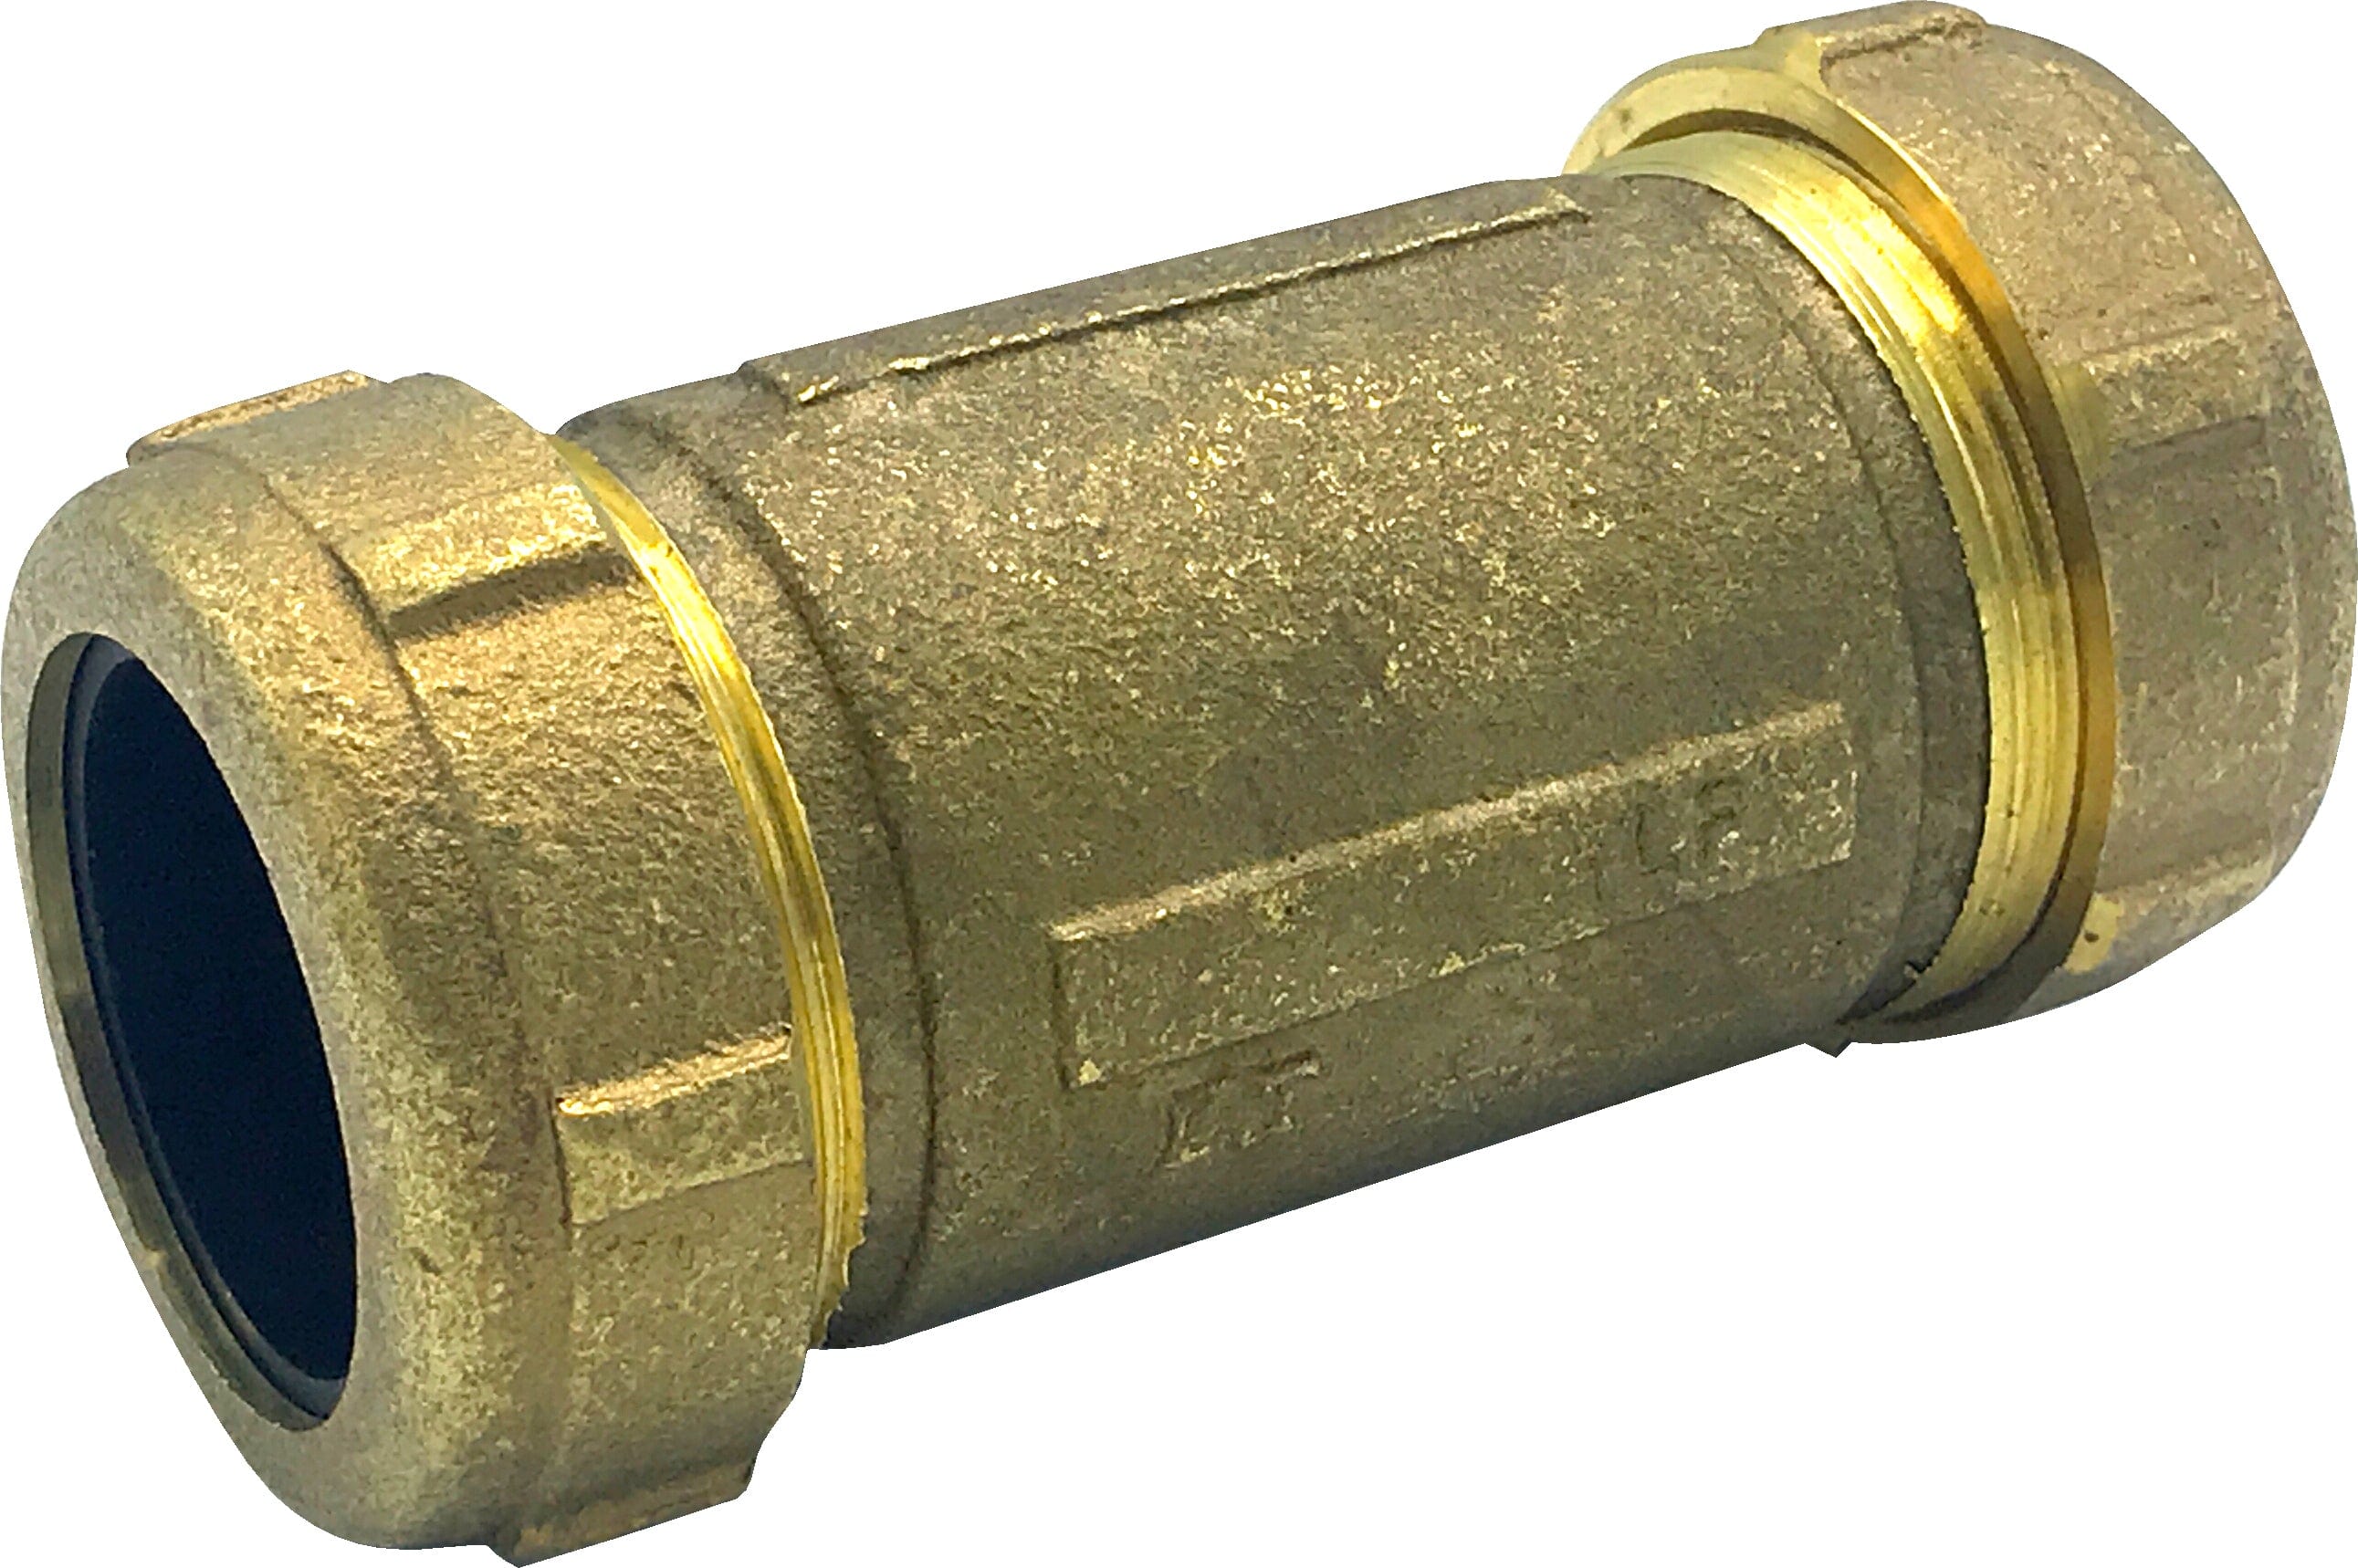 1/2" Long Brass Compression Coupling (Lead-Free)